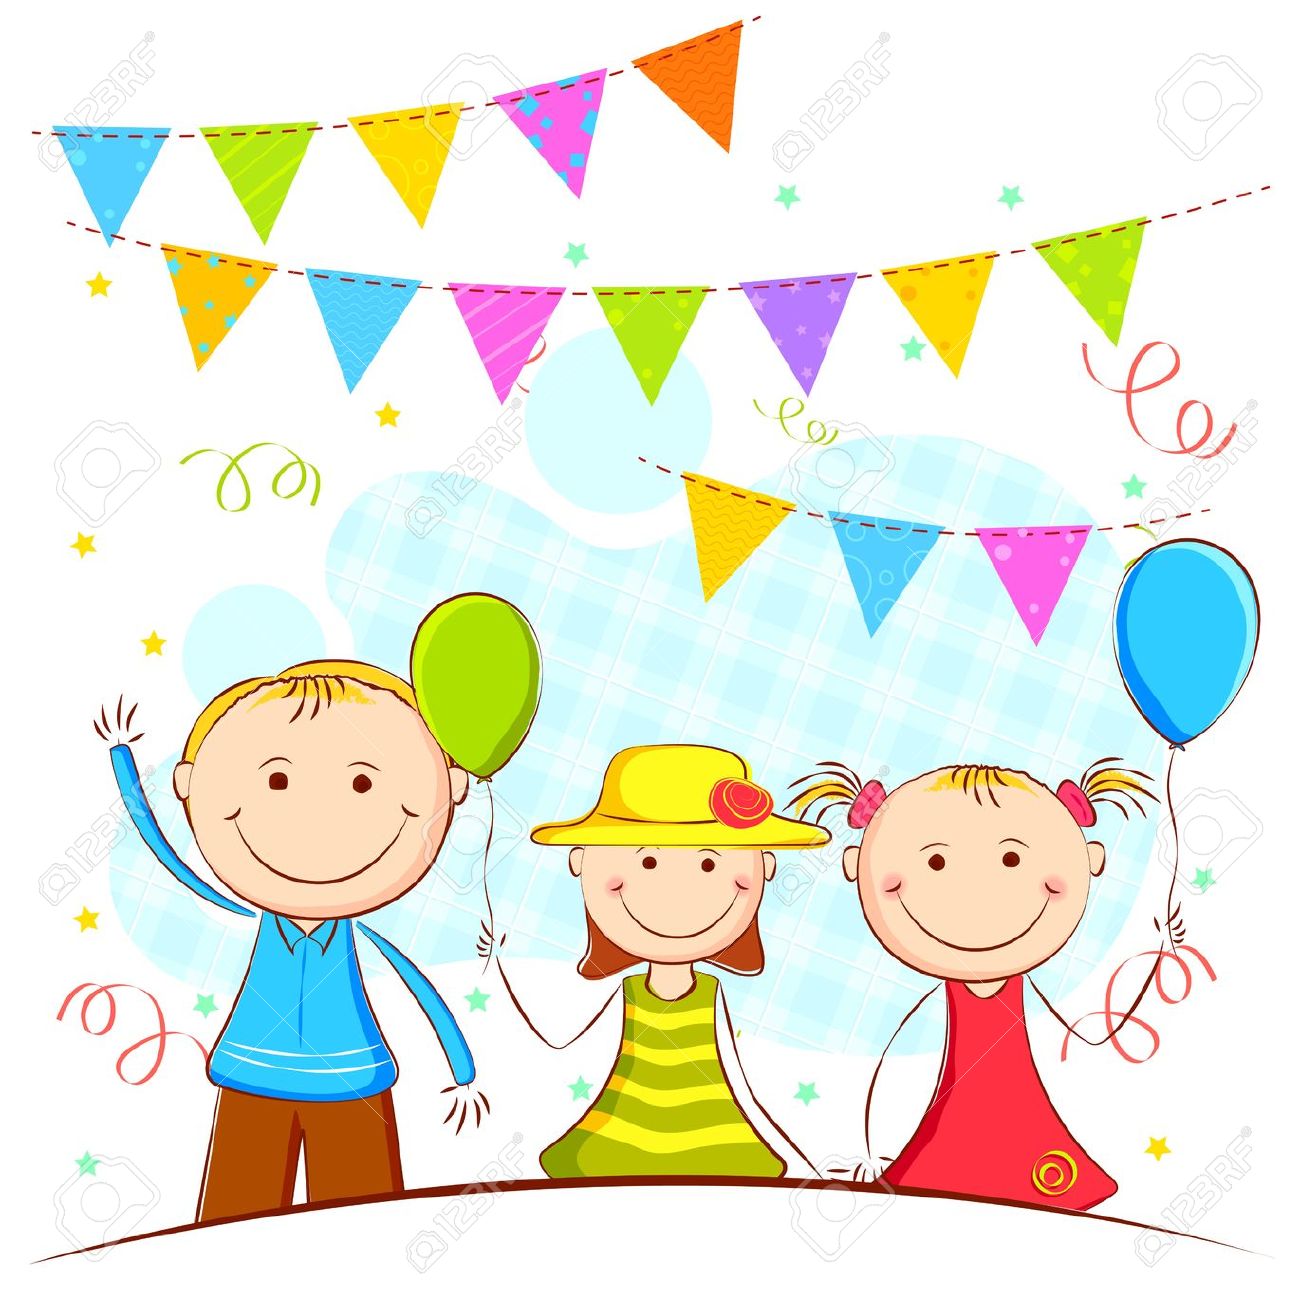 Celebrating Pictures Images Clipart Best